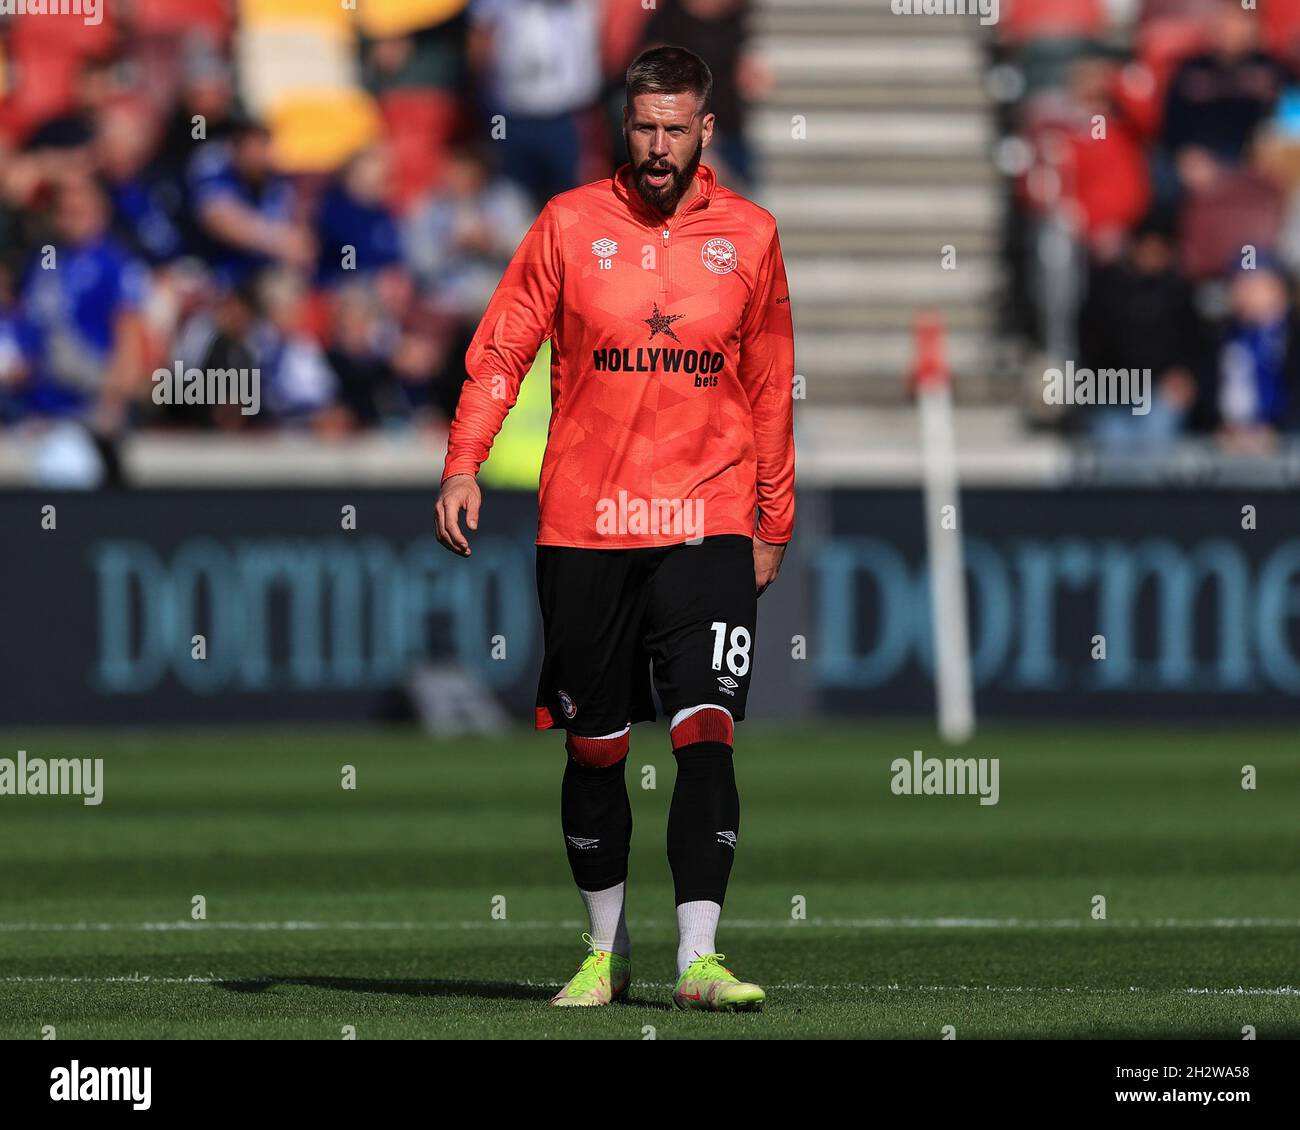 Pontus Jansson #18 of Brentford during the pre-game warmup  in London, United Kingdom on 10/24/2021. (Photo by Mark Cosgrove/News Images/Sipa USA) Stock Photo